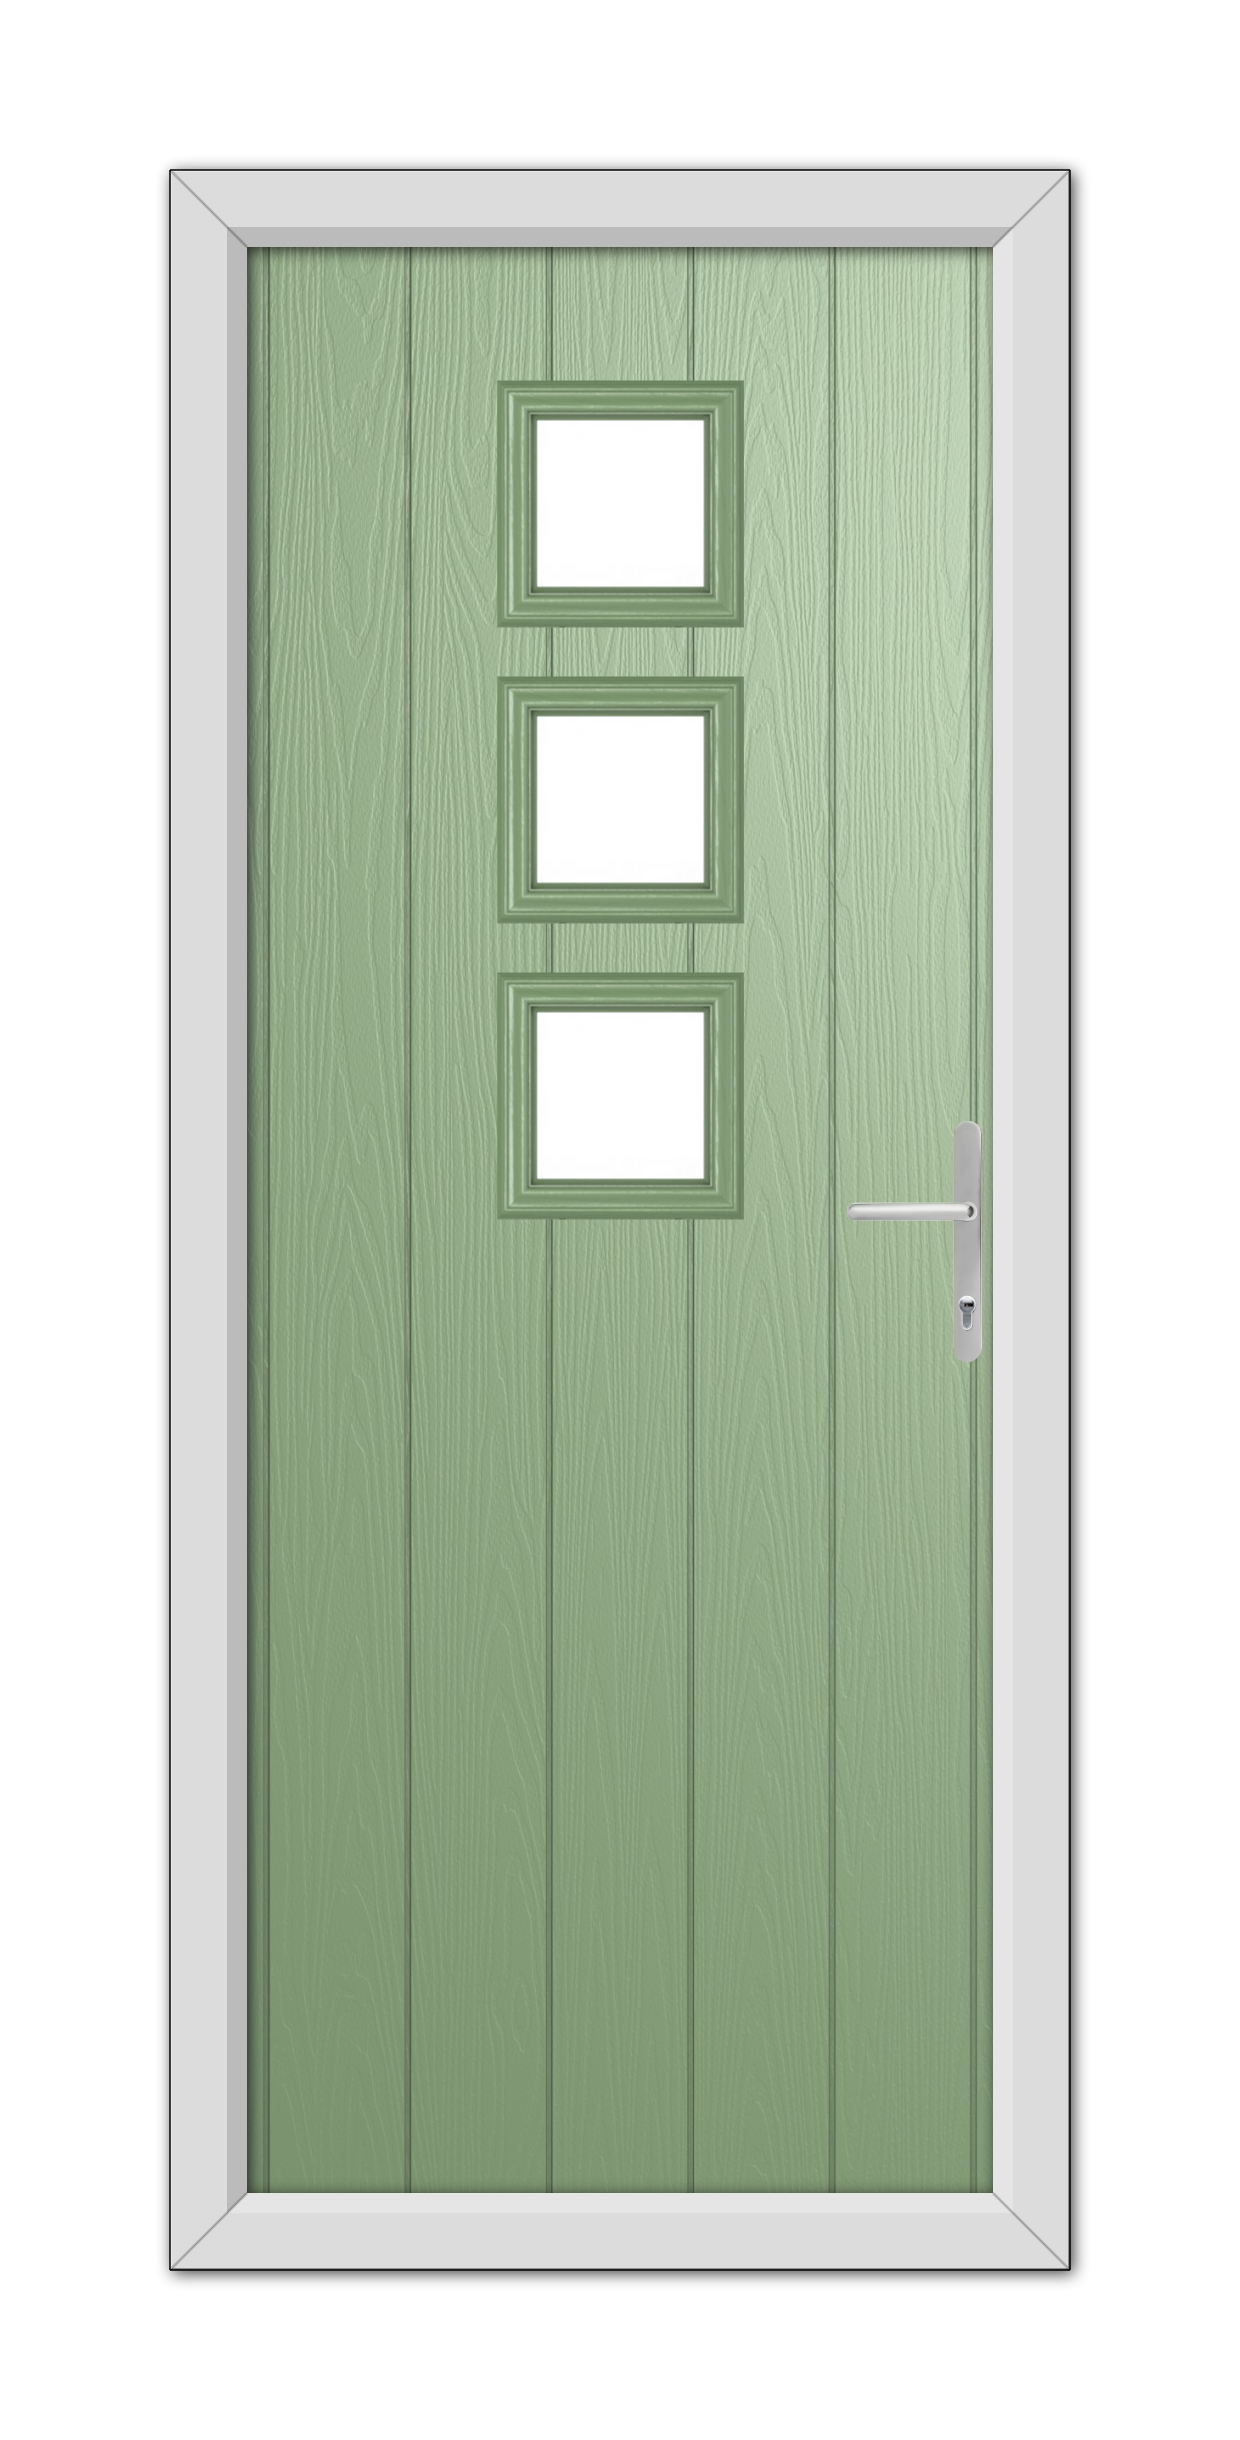 A modern Chartwell Green Montrose Composite Door 48mm Timber Core with three small rectangular windows and a metallic handle, set within a white frame.